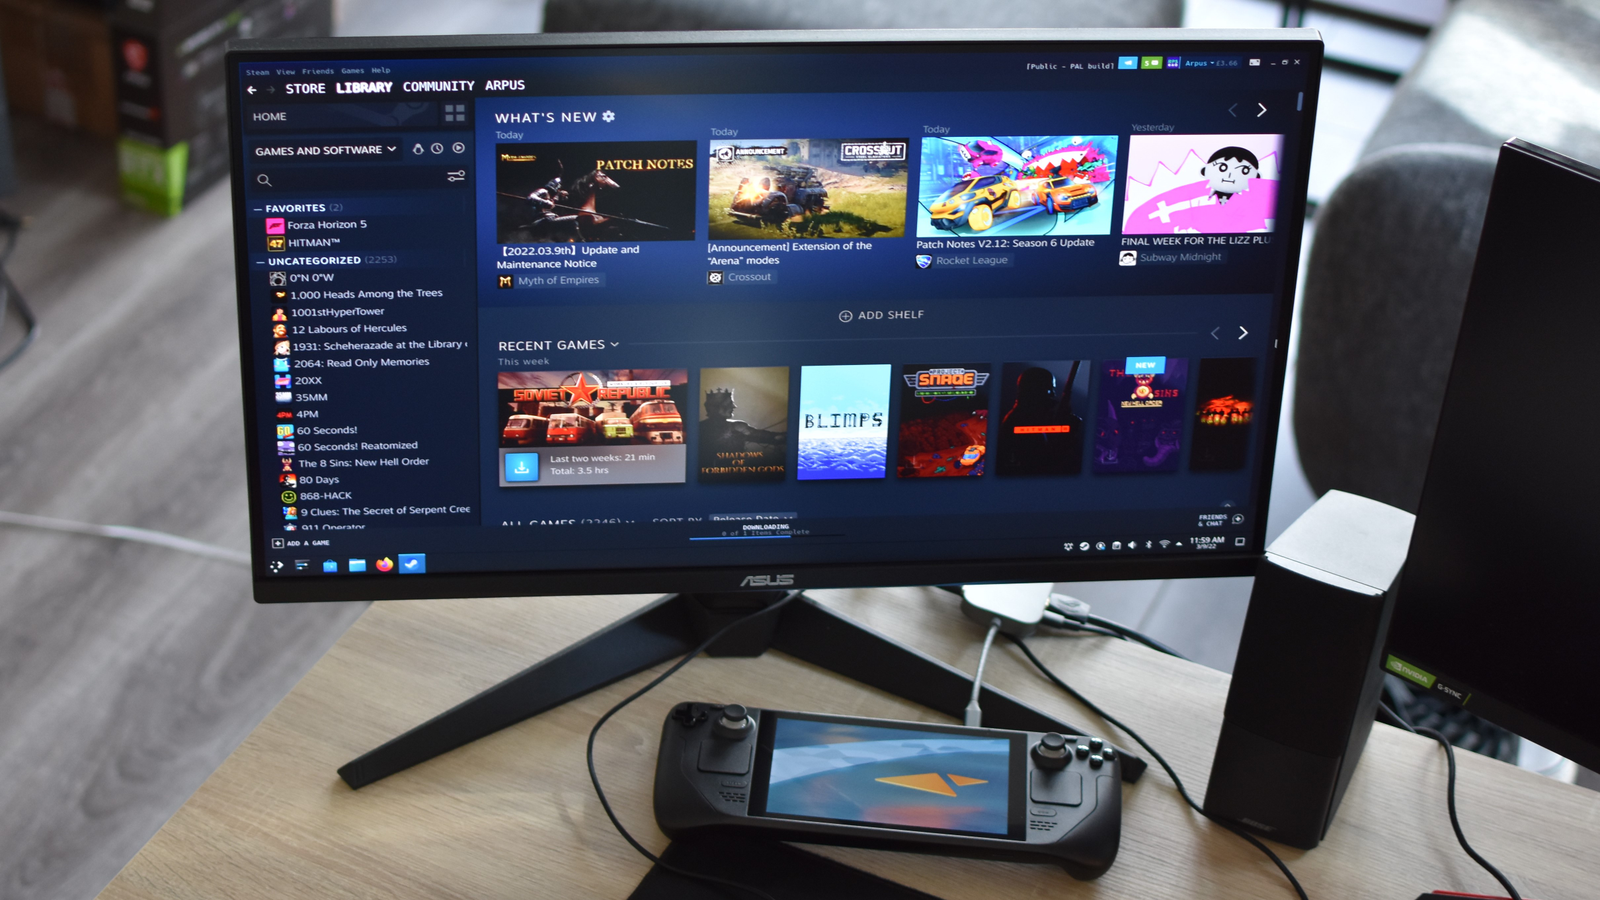 Google Play Games on PC now supports controllers and 4K monitors